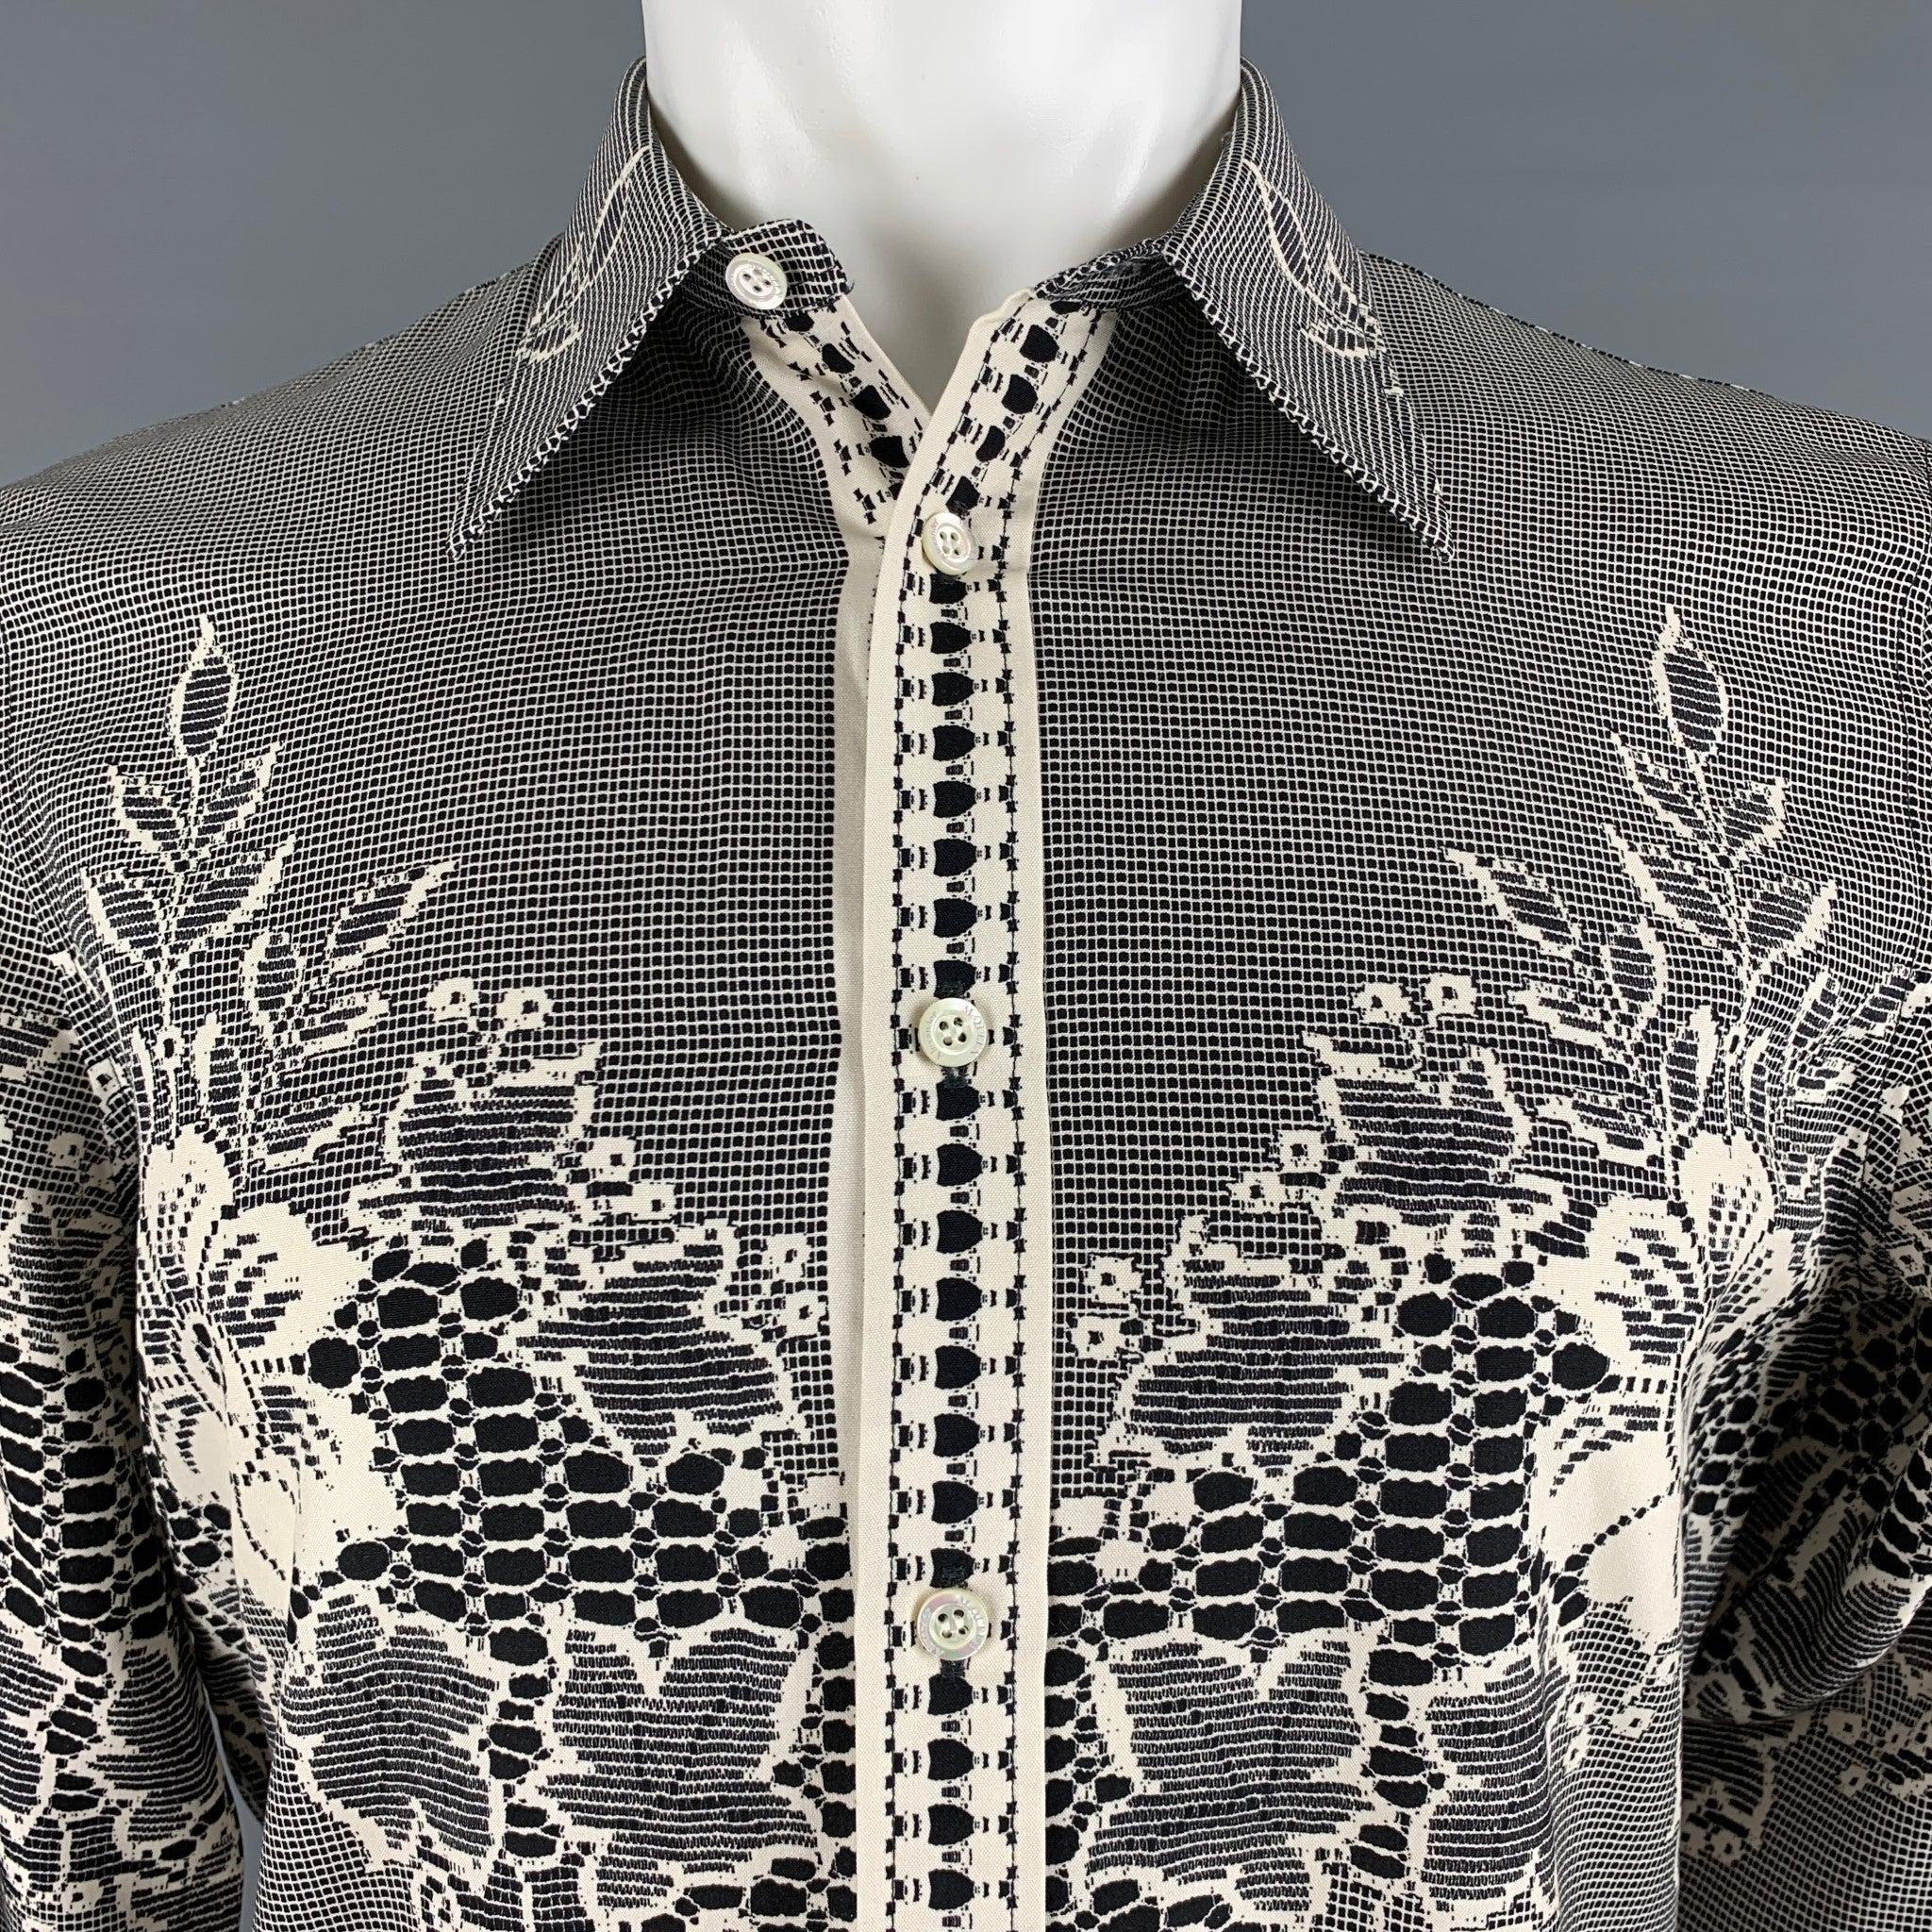 ALEXANDER McQUEEN long sleeve shirt comes in a black and beige lace print cotton woven material featuring a straight collar and a button up closure. Made in Italy.Excellent Pre-Owned Condition.  

Marked:   S 

Measurements: 
 
Shoulder: 17 inches